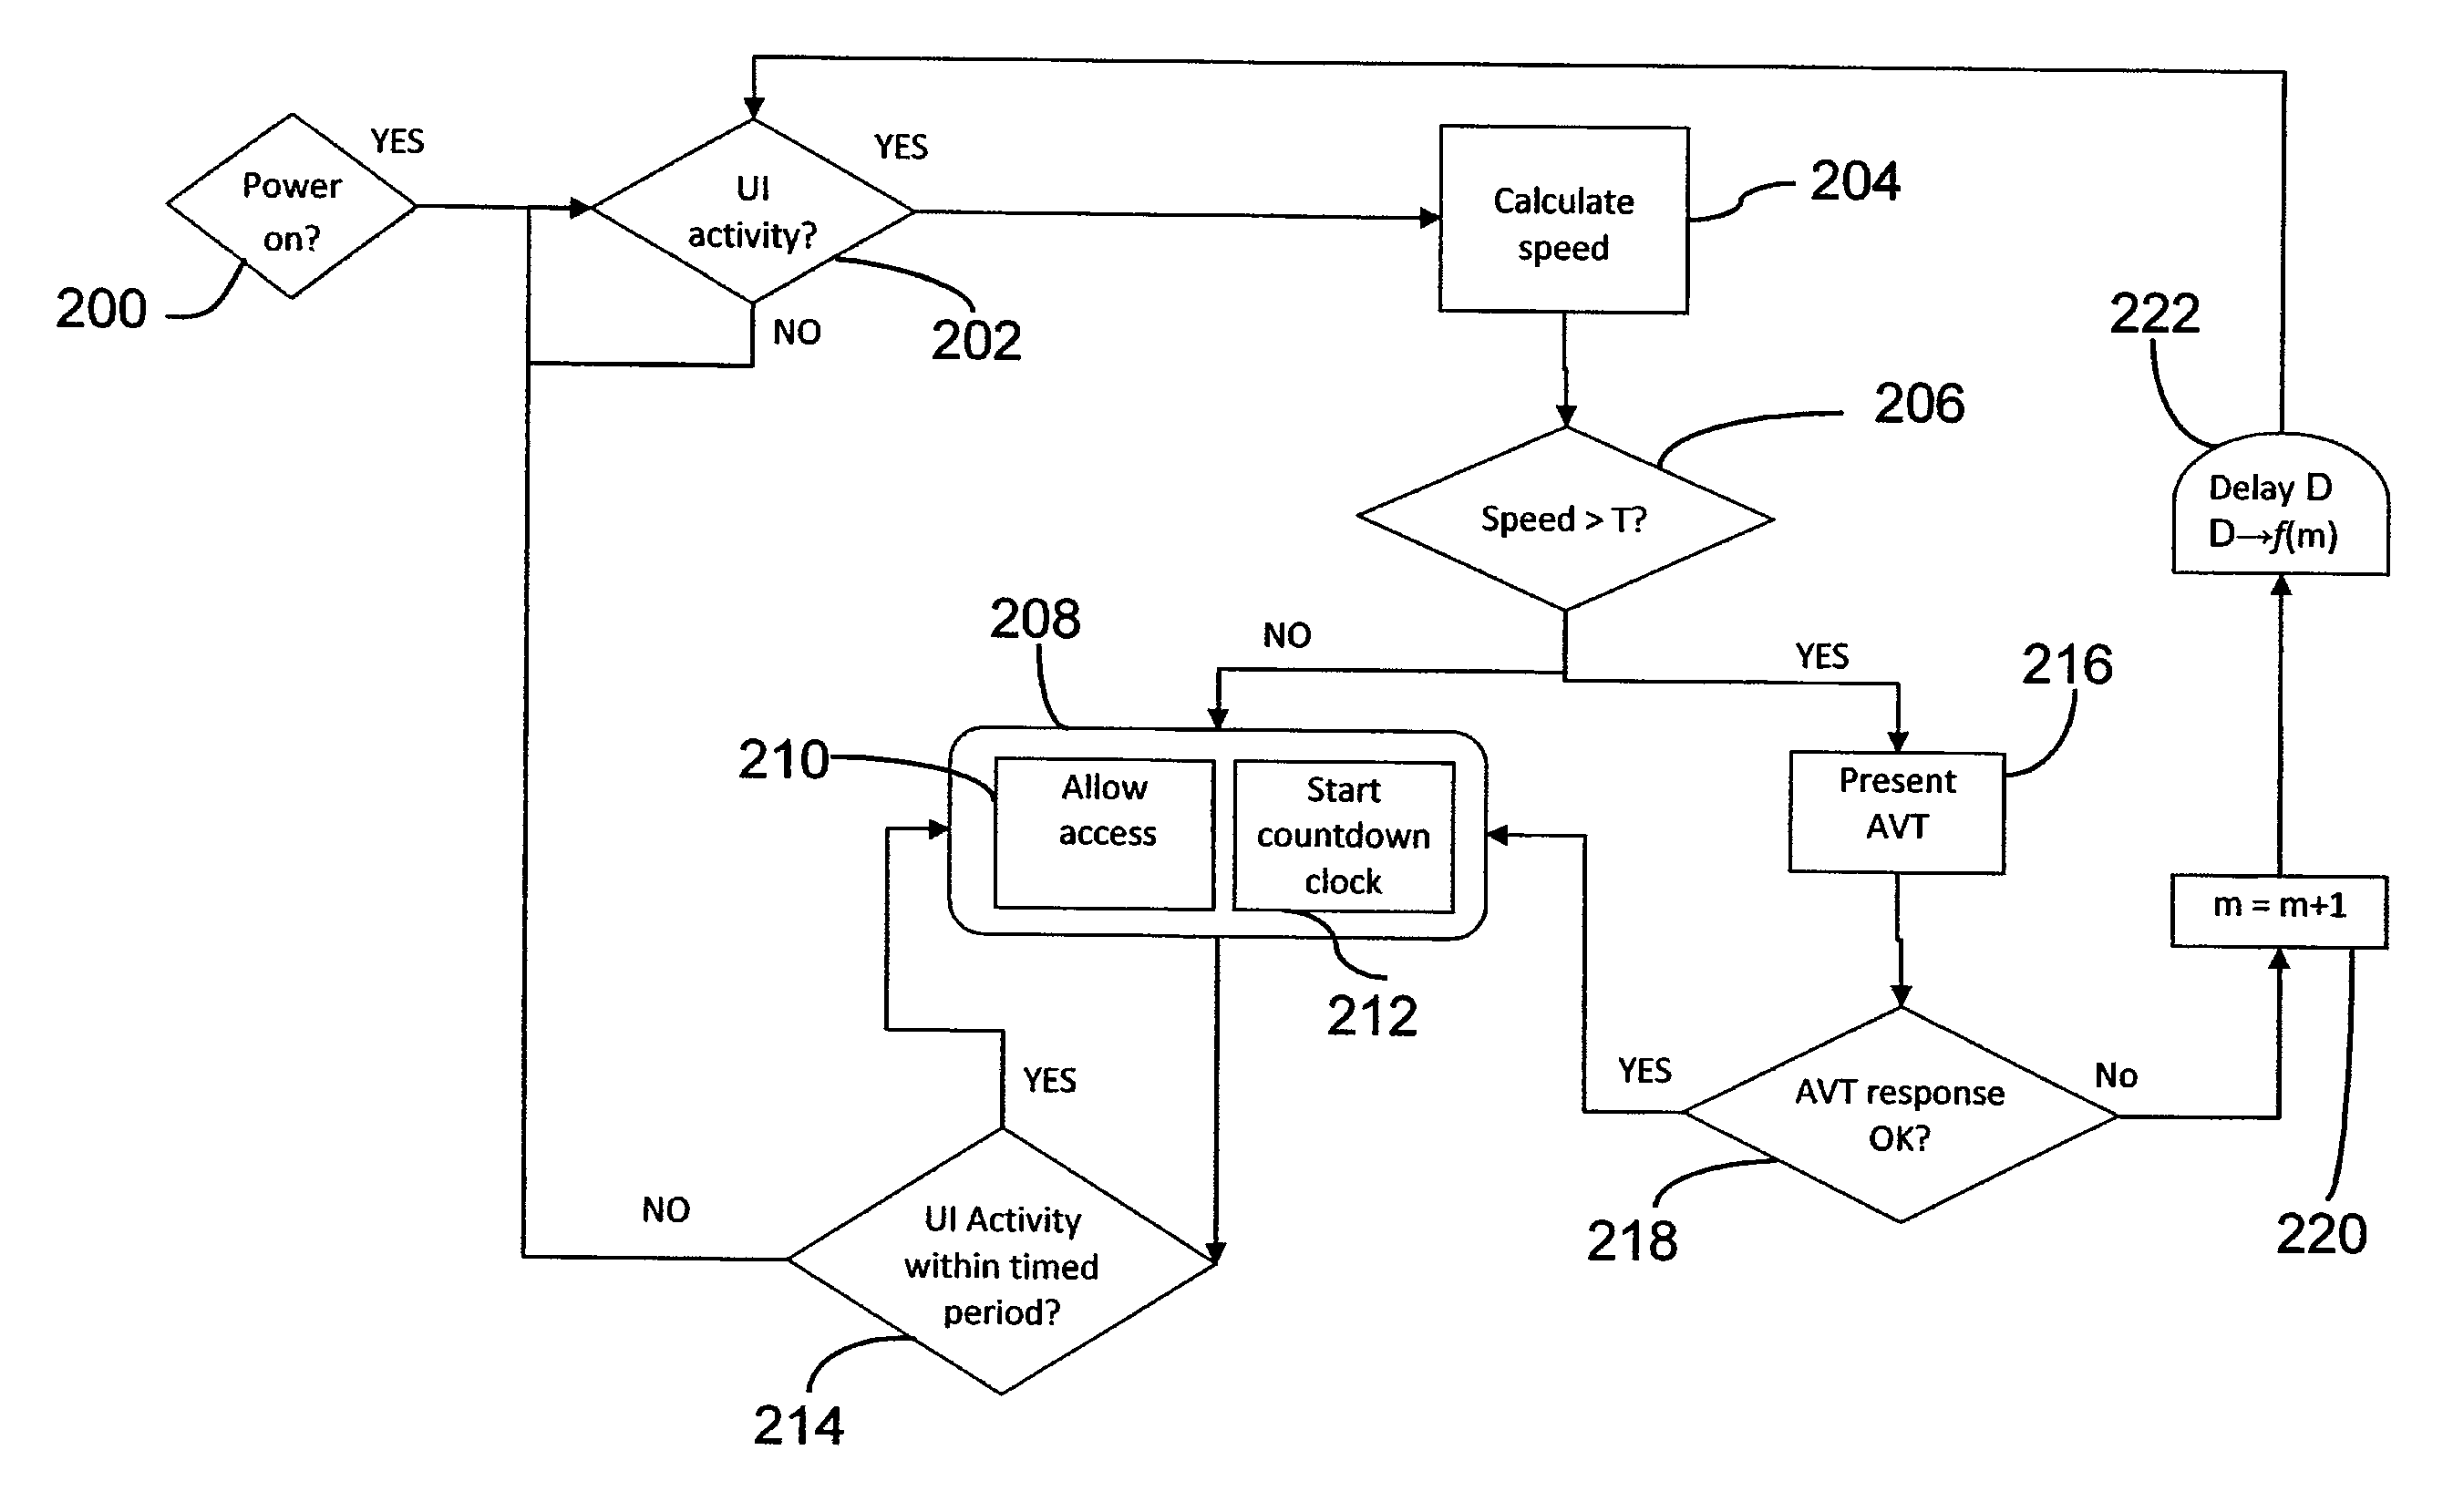 Method for limiting the use of a mobile communications device